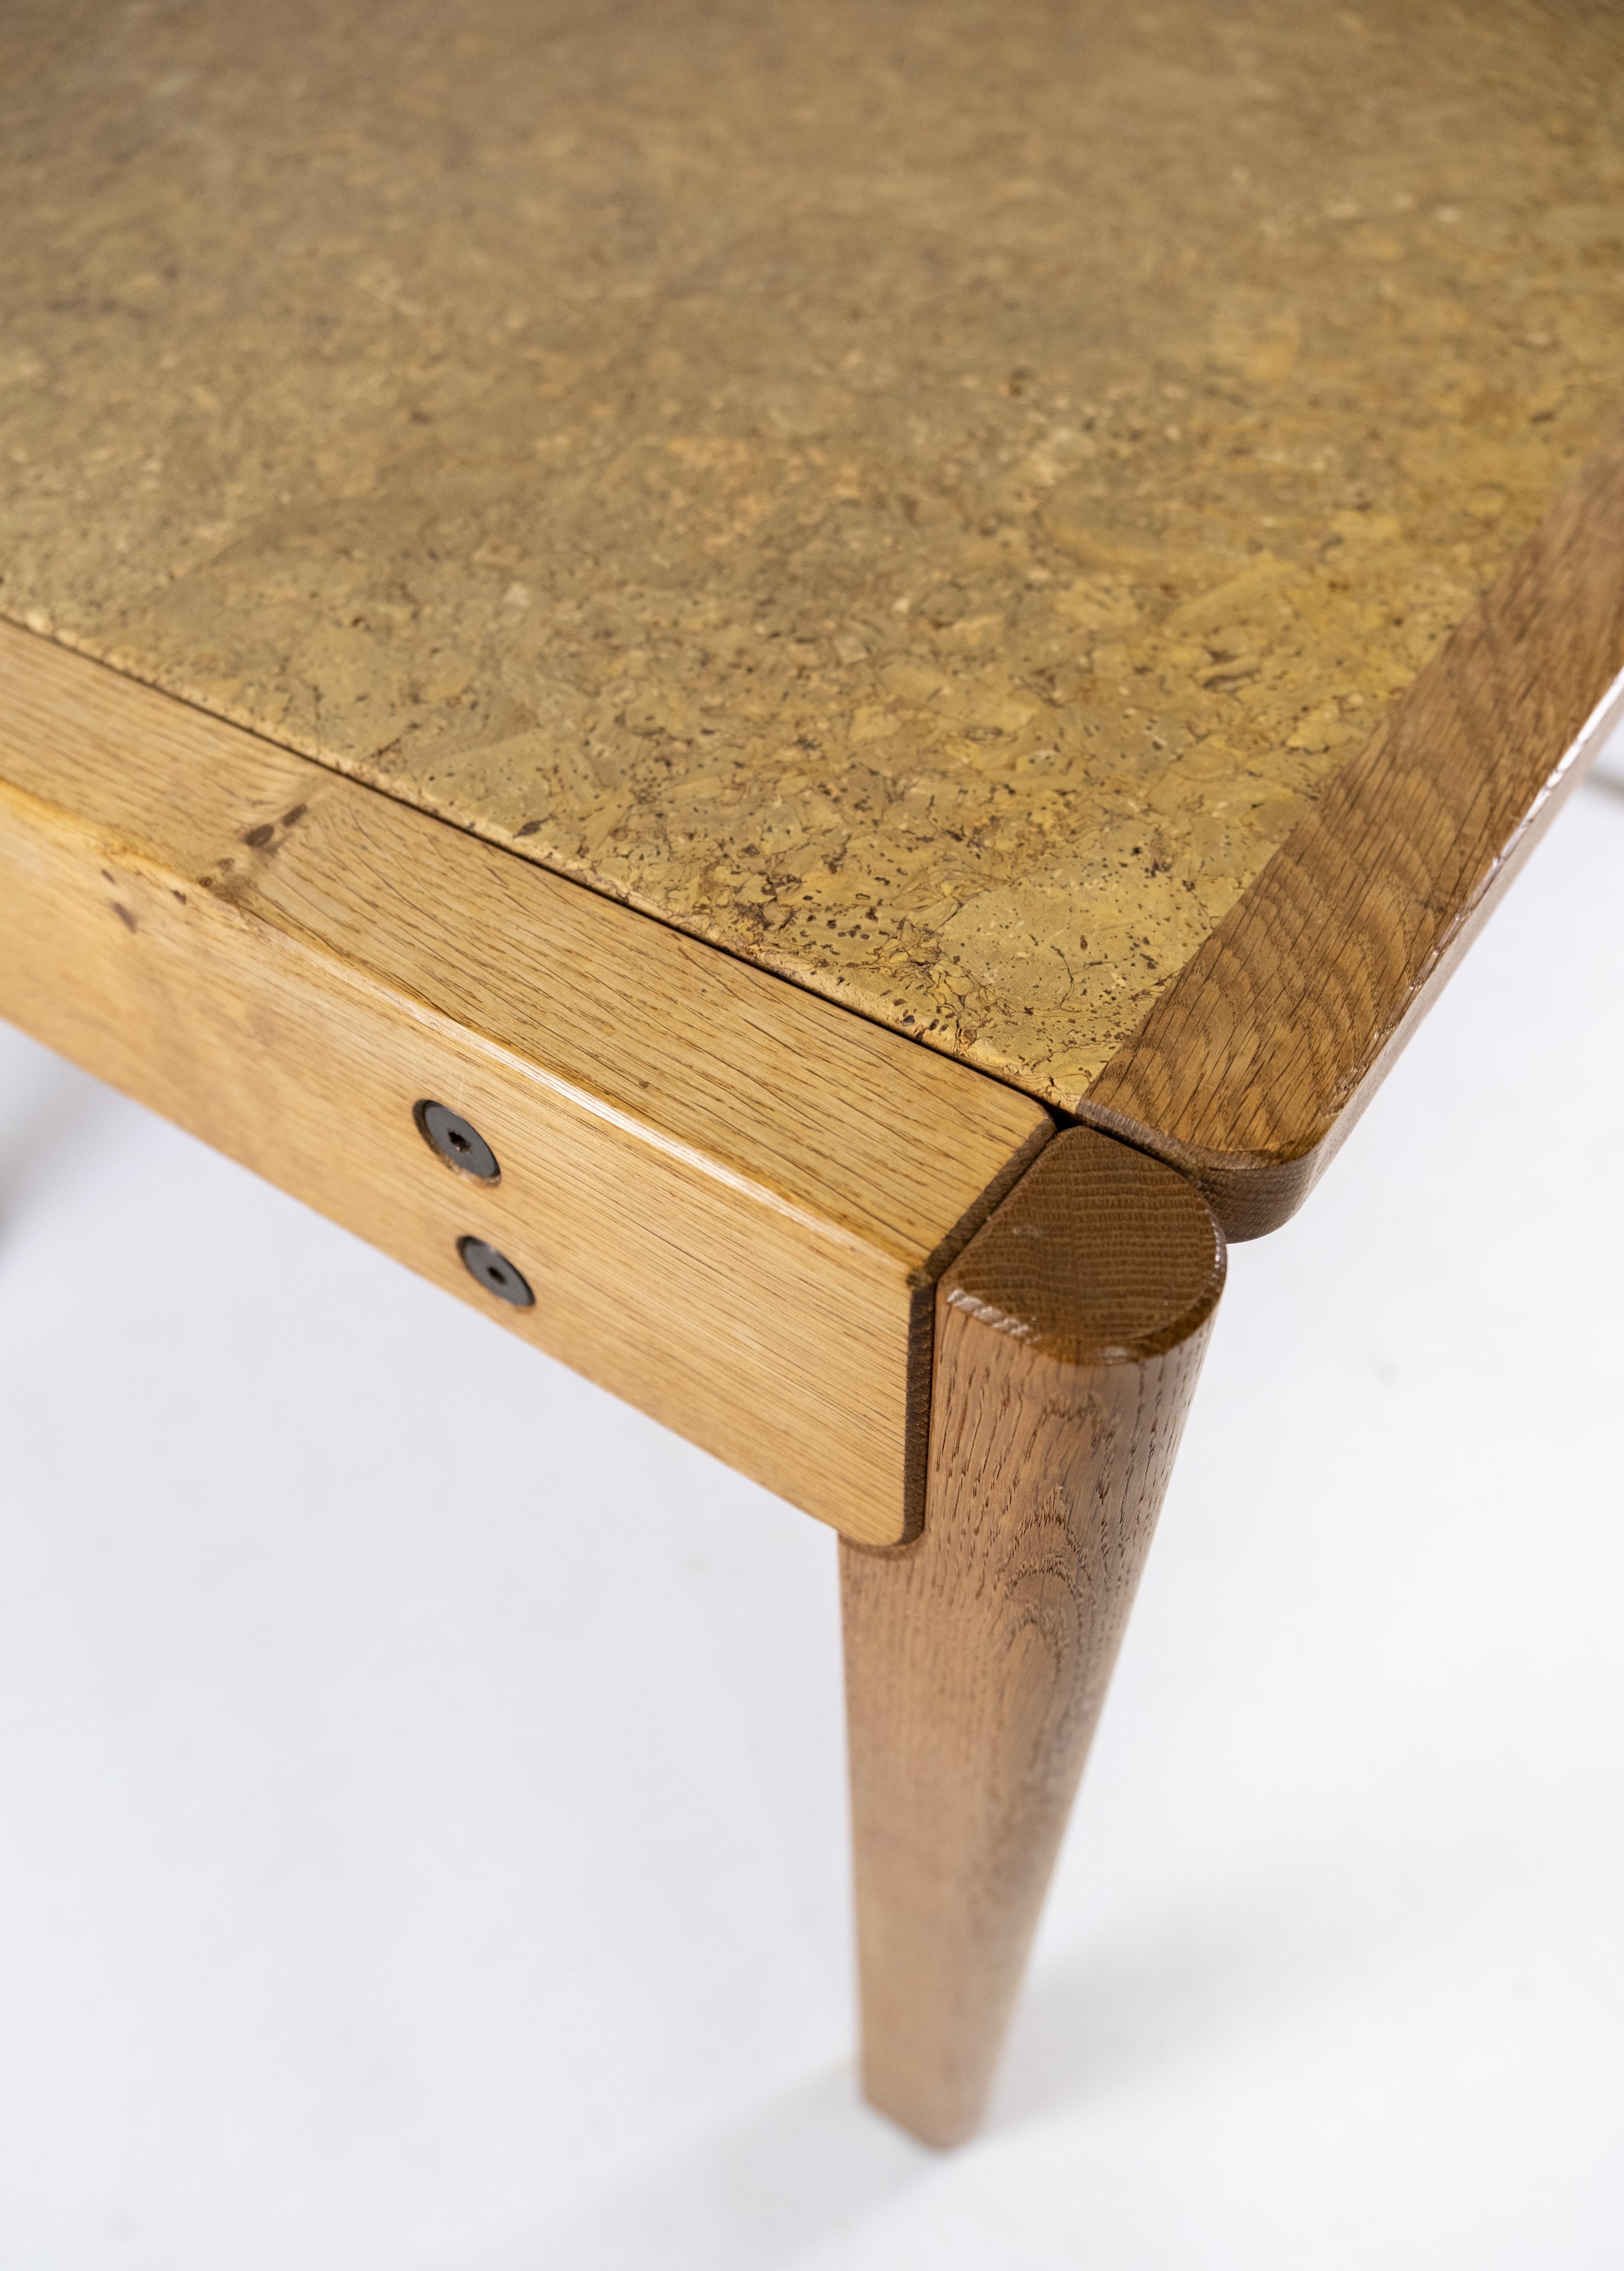 Mid-20th Century Dining Table Made In Oak & Cork, Danish Design From 1970s For Sale